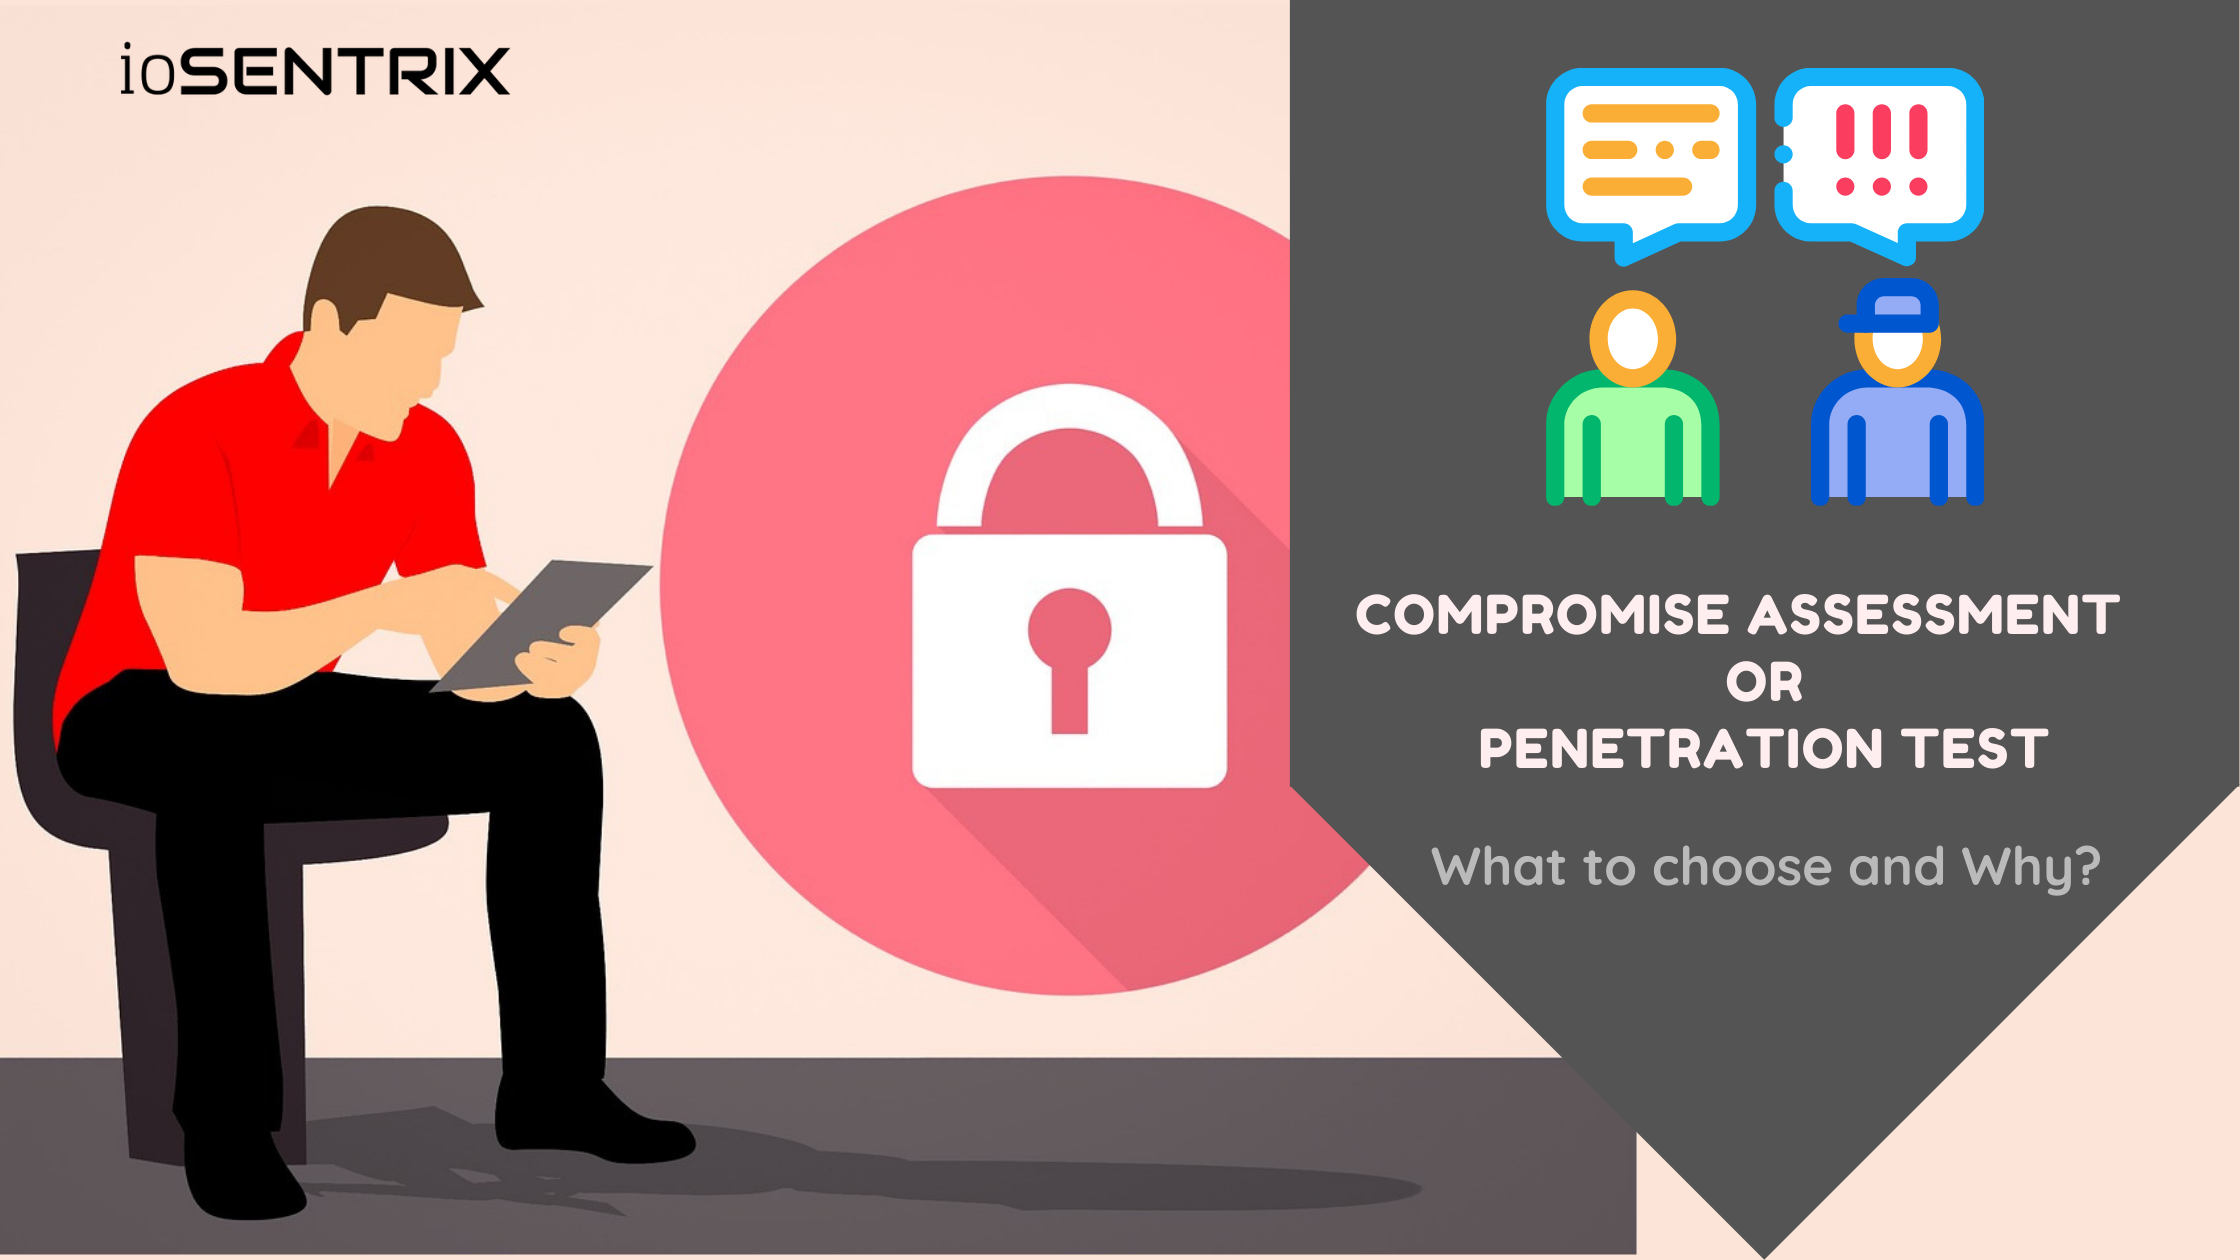 Compromise Assessment or Penetration Testing - What to choose and Why?